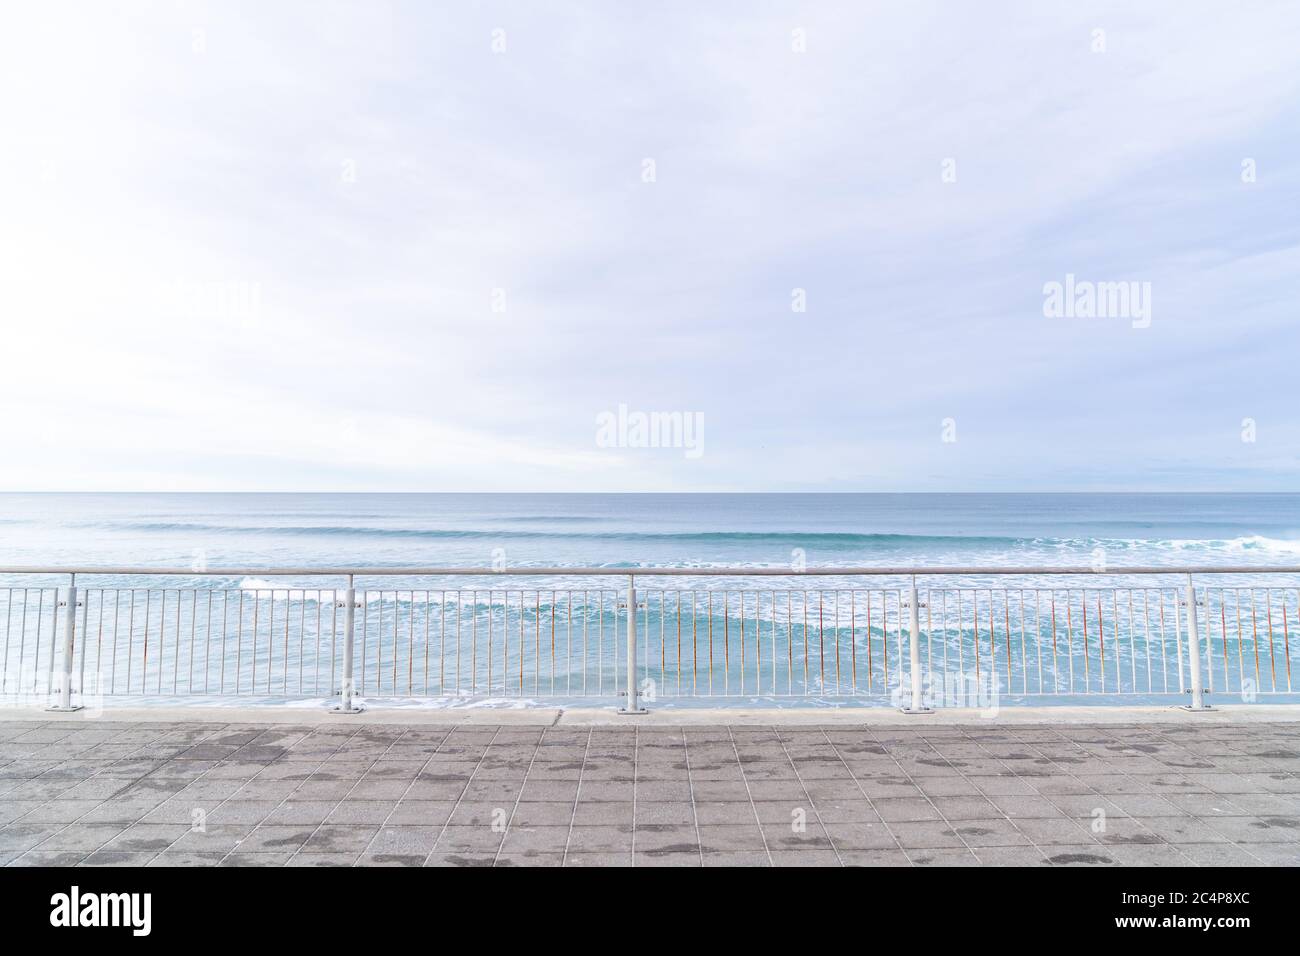 Soft blue ocean wave on sandy beach with metal fences. Background textured. Stock Photo